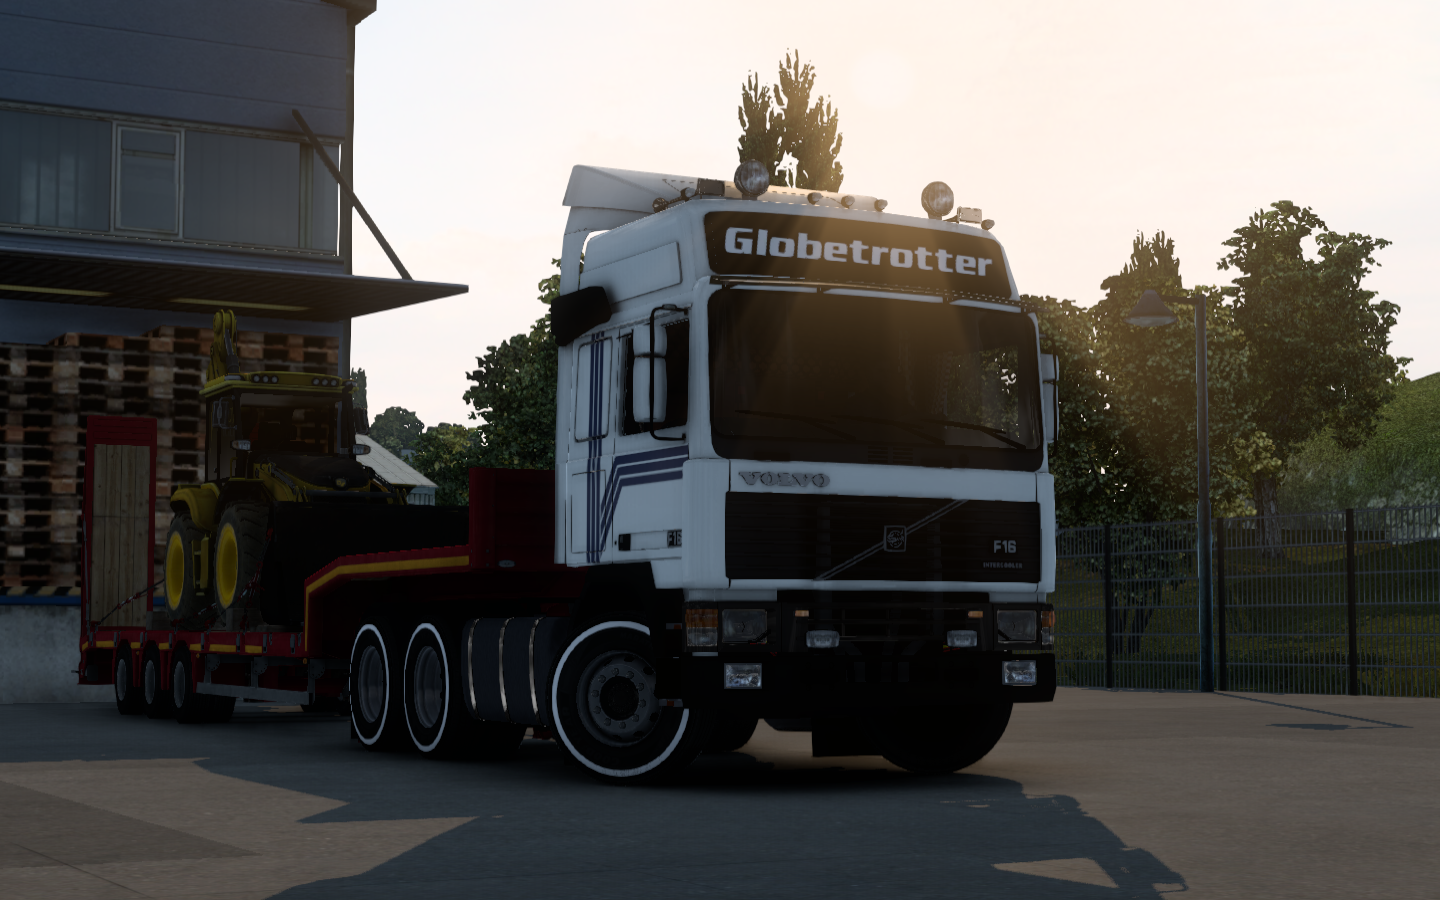 ets2_20210528_222921_00.png